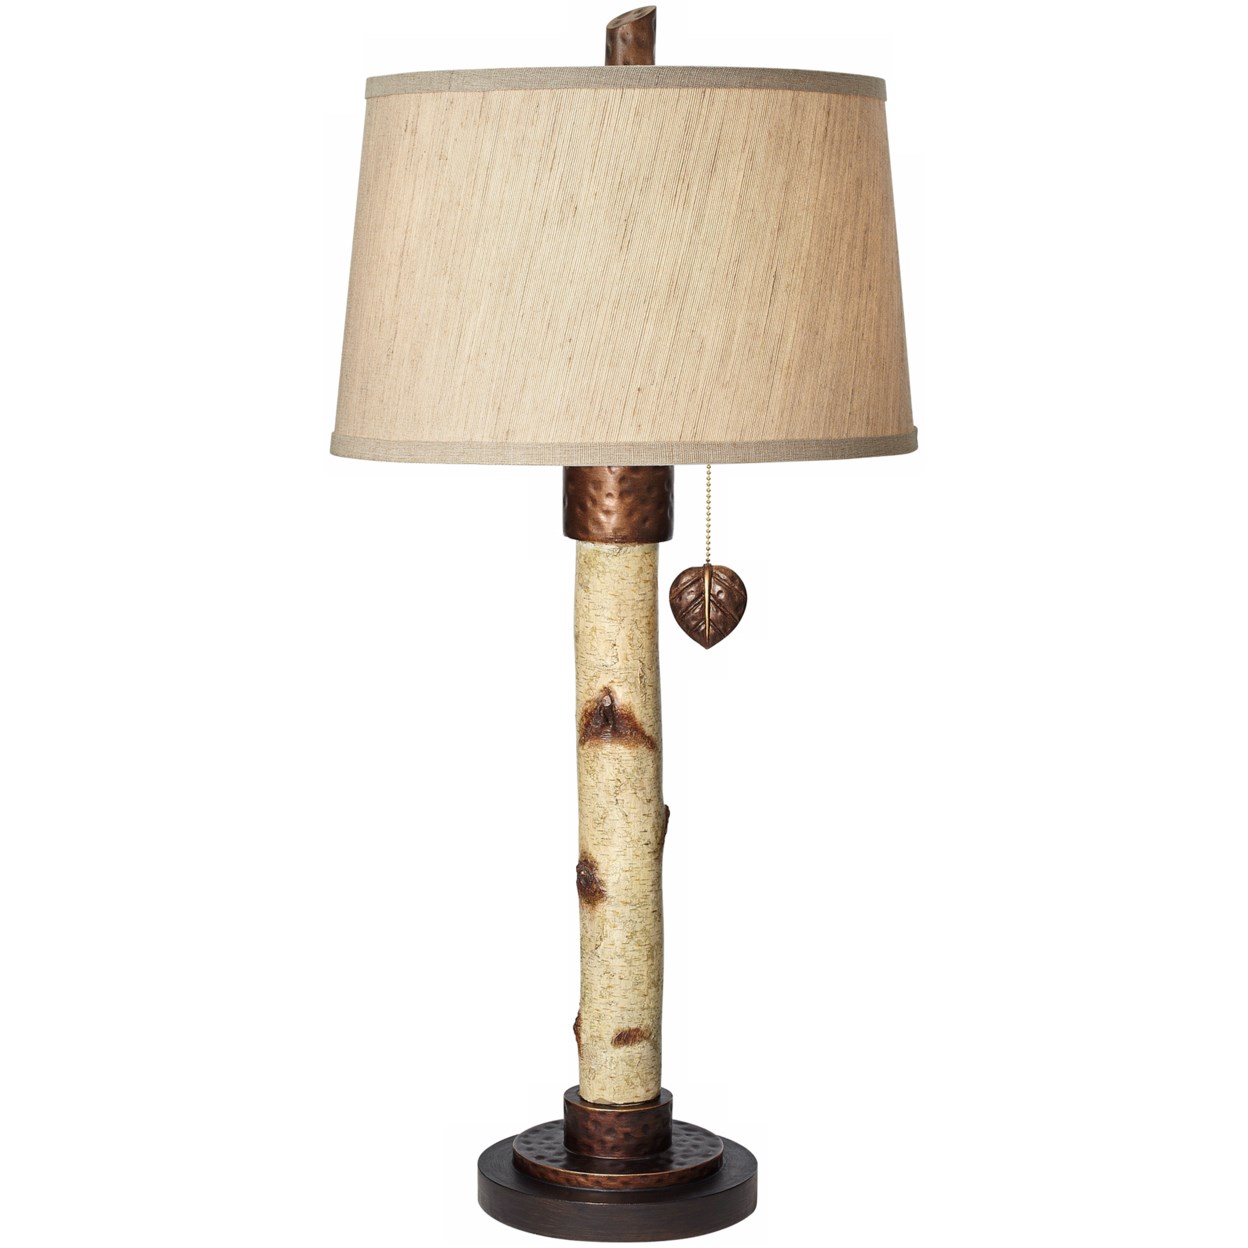 Pacific Coast Lighting Pacific Coast Lighting TL-Poly birch tree table lamp